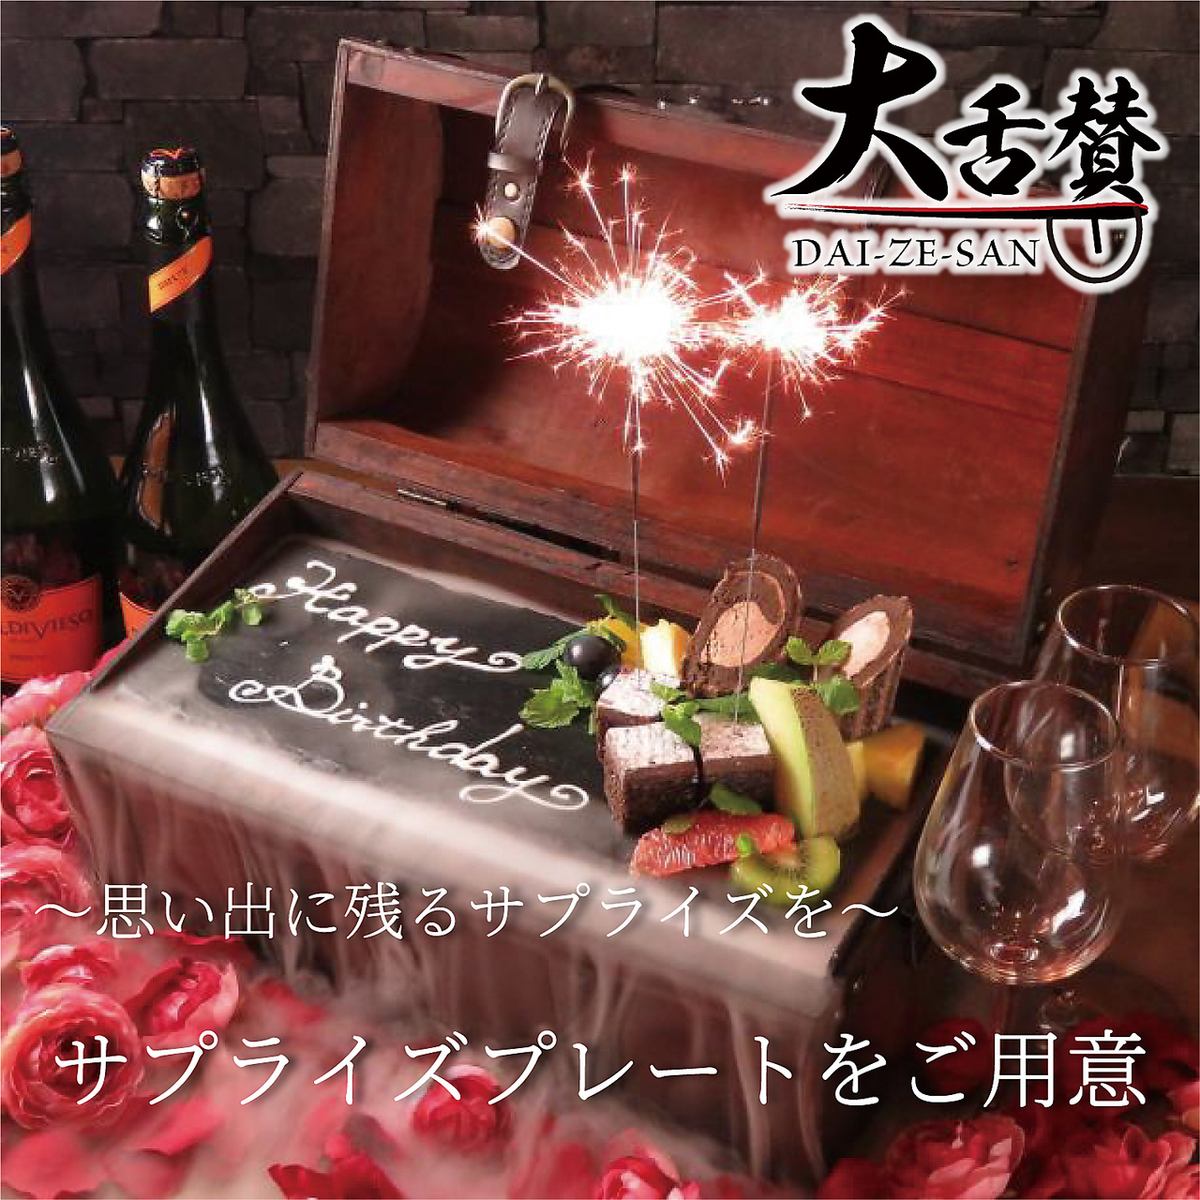 We have a wide selection of sake, shochu, and cocktails!! Perfect for parties and all-you-can-drink♪